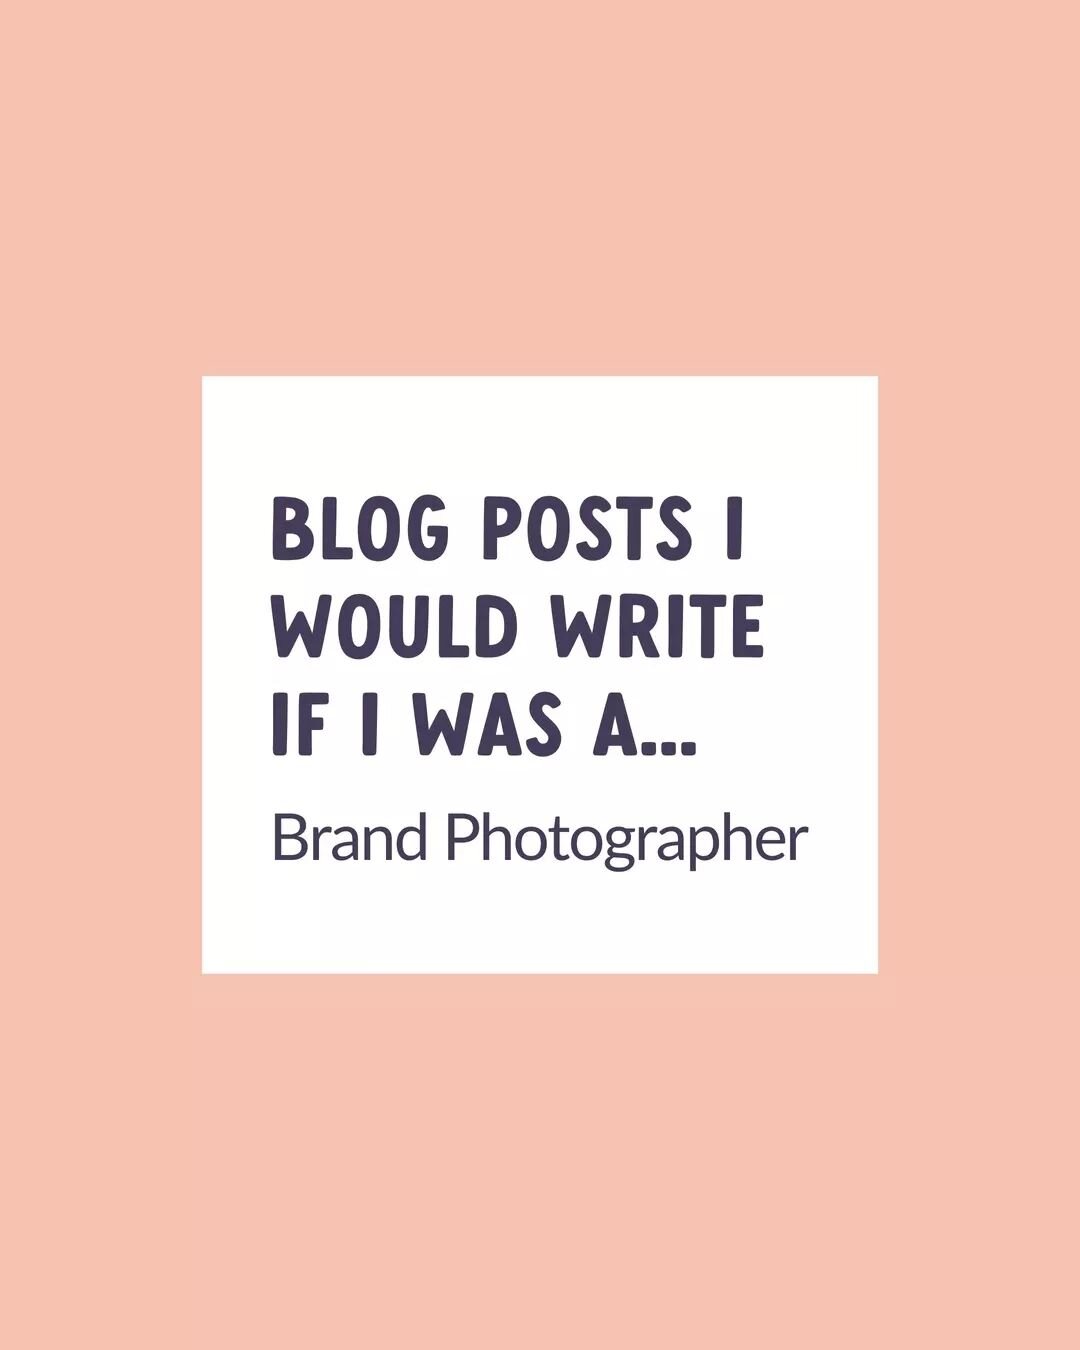 📸&nbsp;Branding photographers, this one's for you!

You asked, I delivered.

A whole heap of blog posts that'll boost your SEO AND help your dreamy clients get answers to the questions you find yourself answering over and over and over again.

Ngl, 